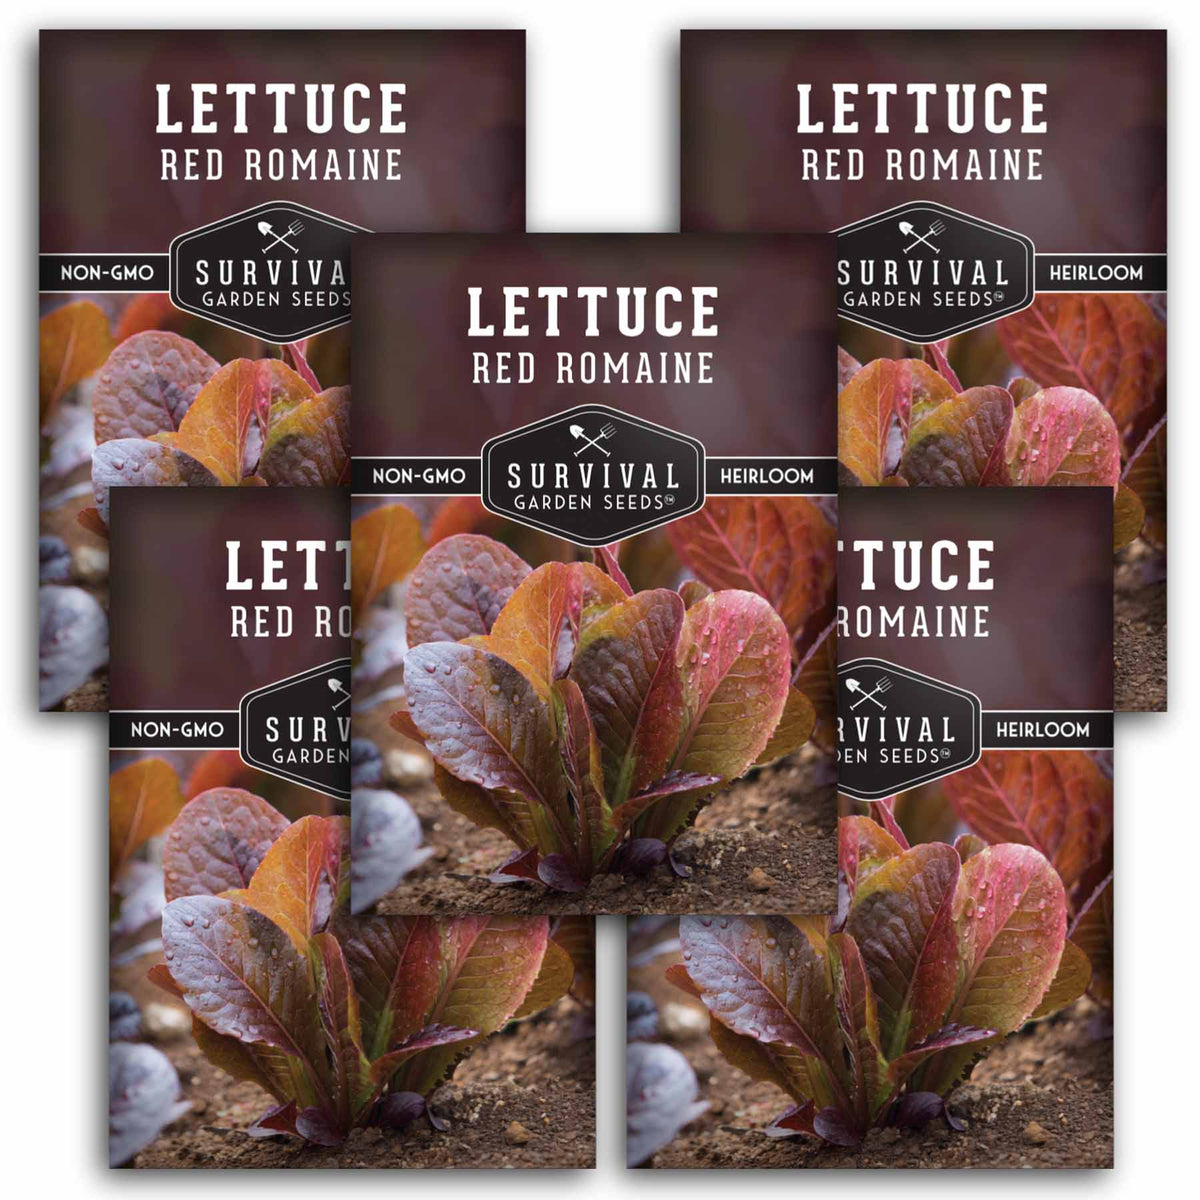 5 packets of Red Romaine Lettuce seeds